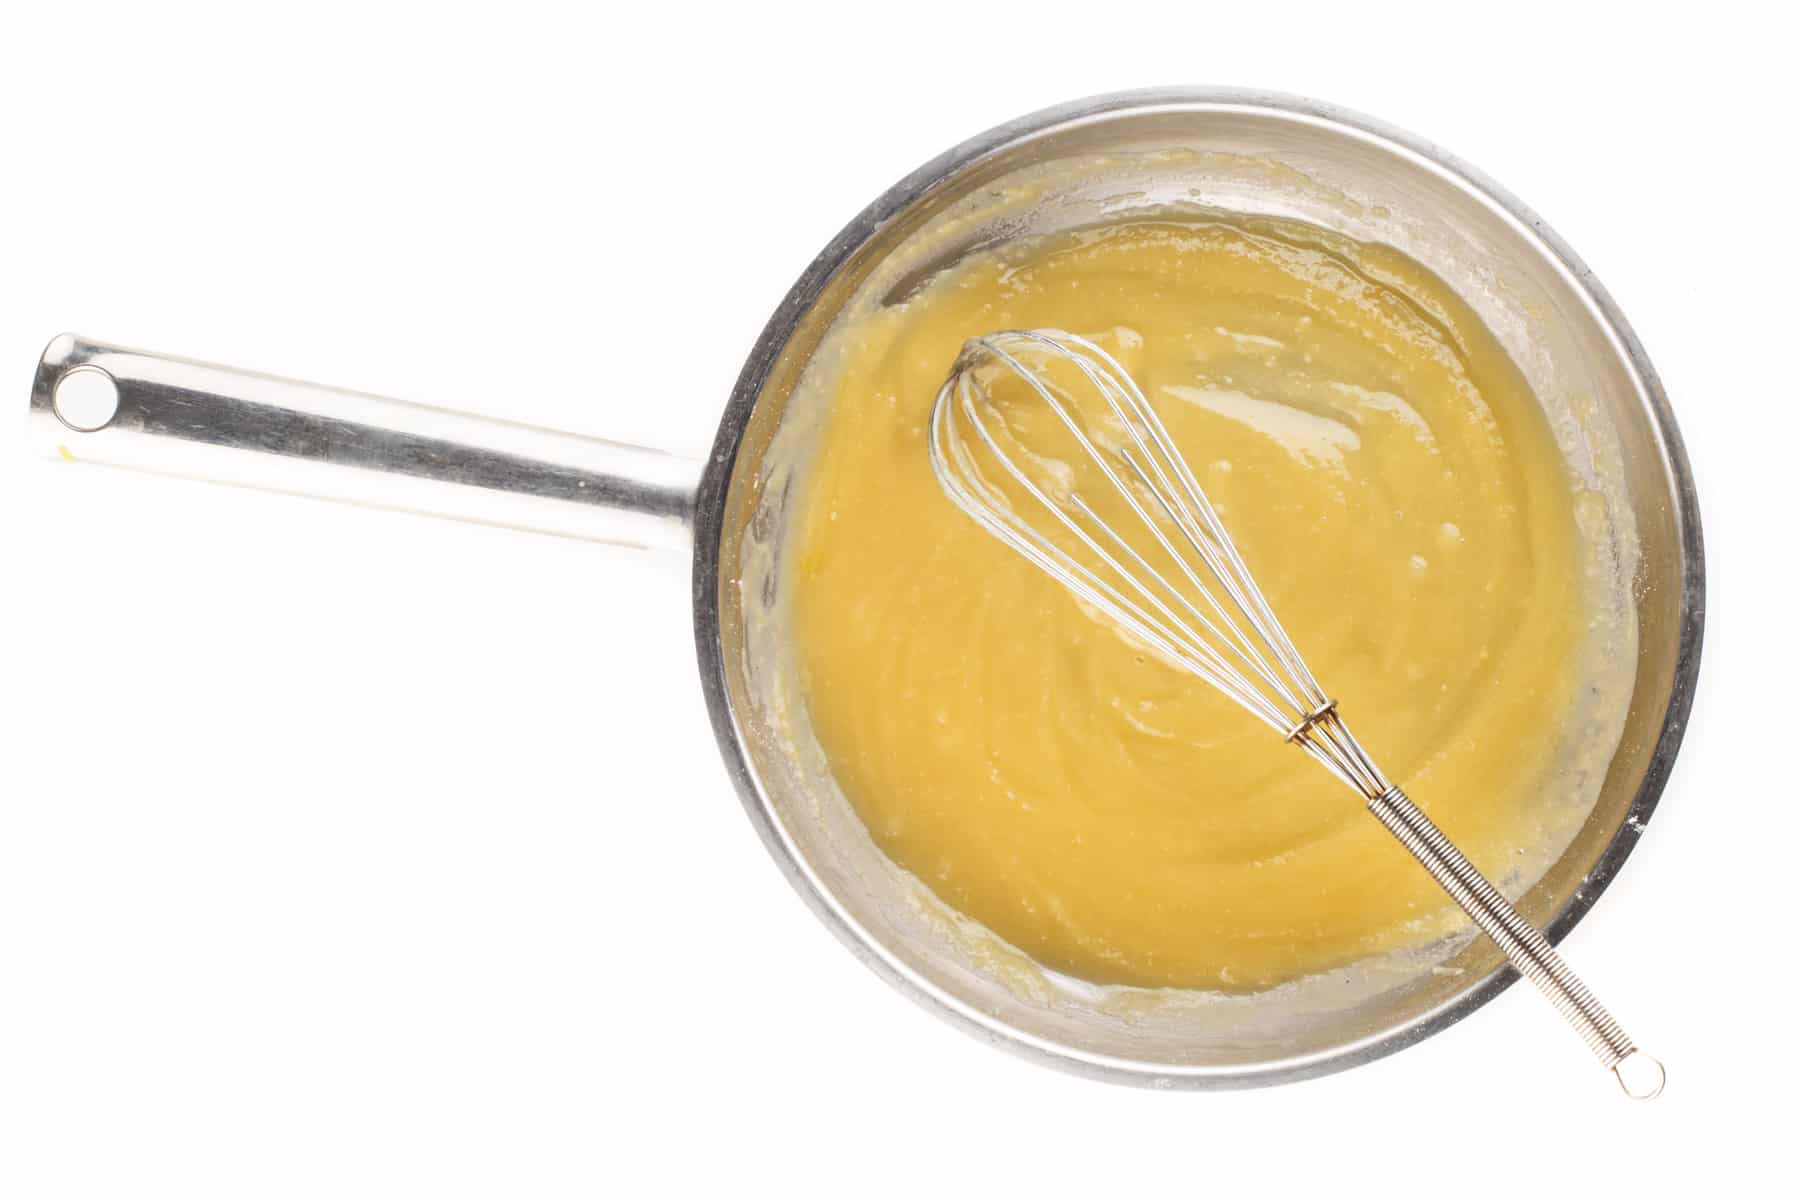 Vegan butter is melted in a skillet and flour is added to make a roux.